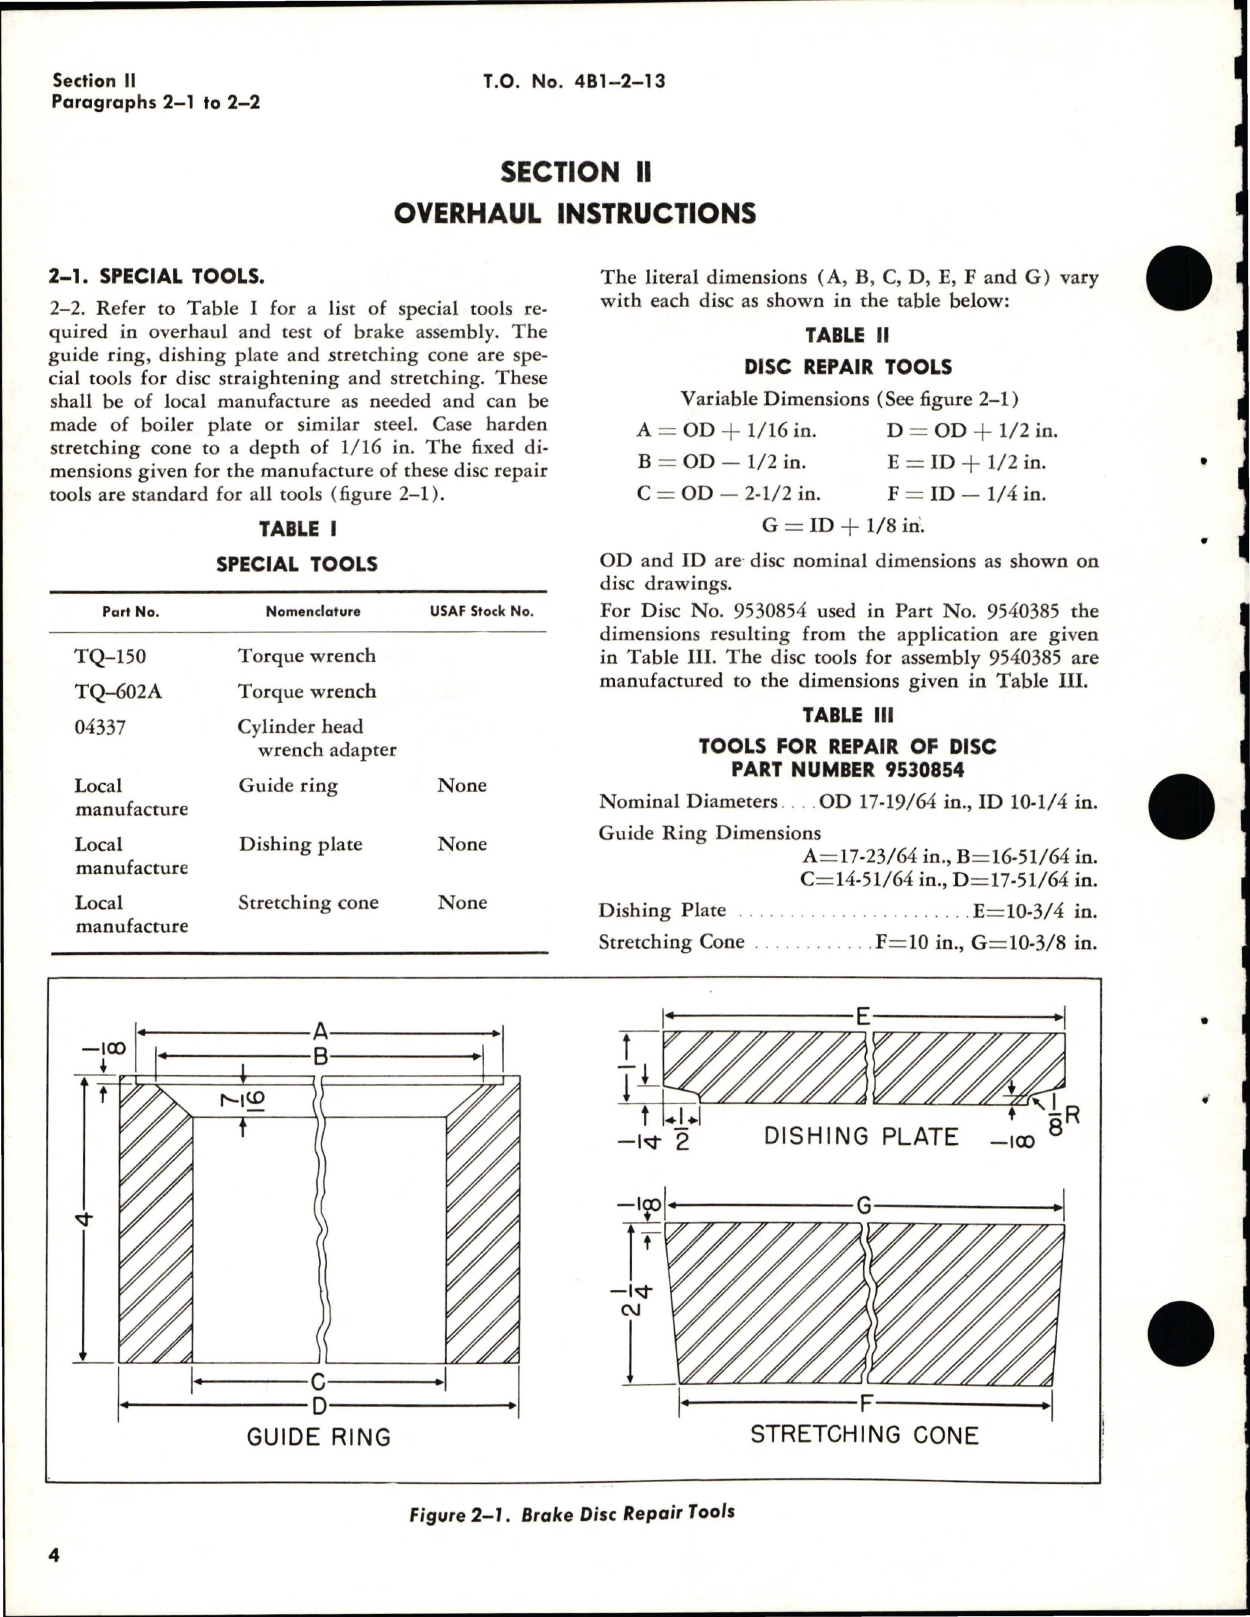 Sample page 8 from AirCorps Library document: Overhaul Instructions for Single and Dual Disc Brakes